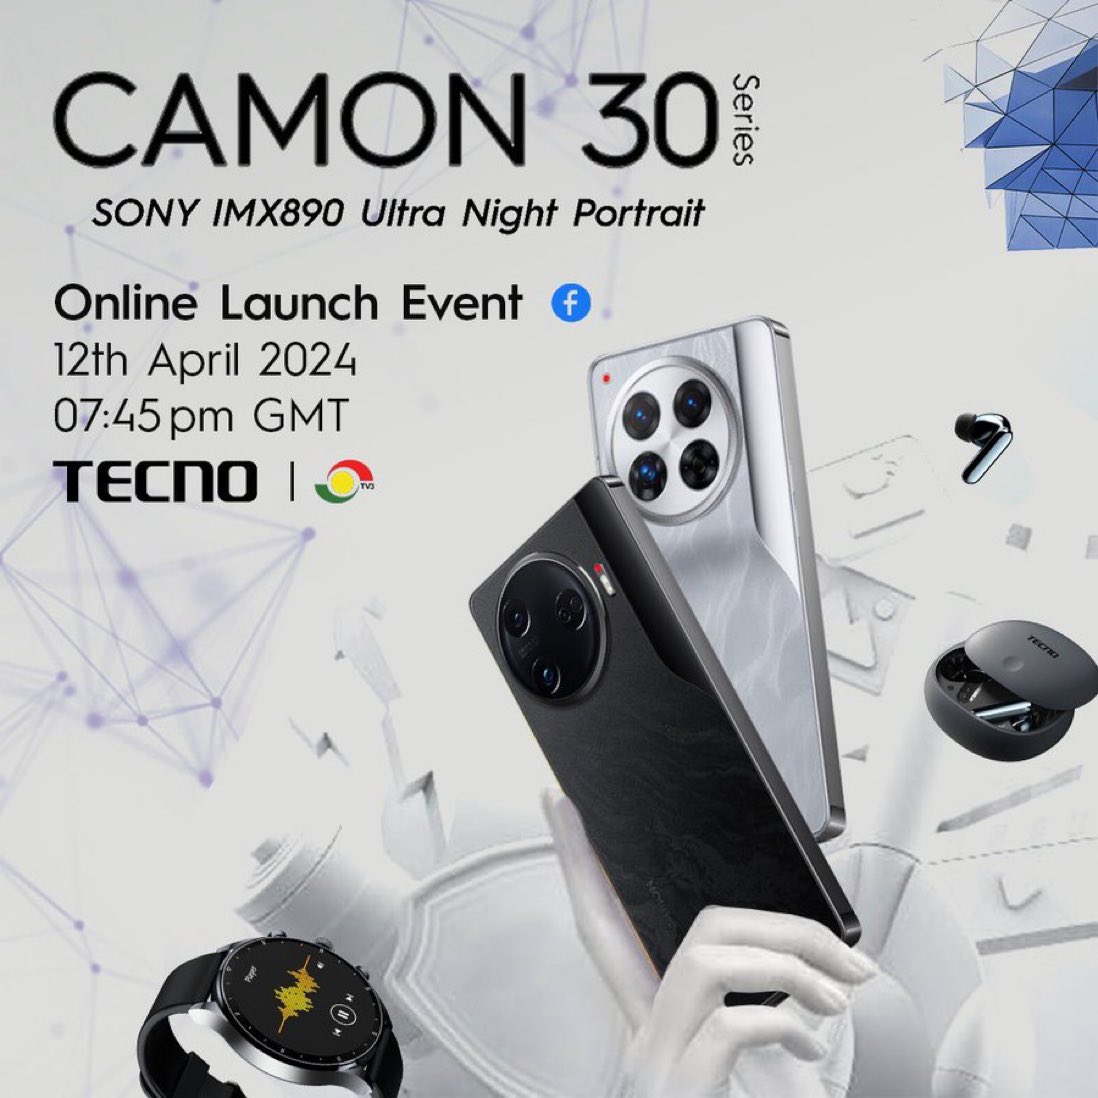 Don’t miss out on the exclusive debut of the renowned CAMON smartphone series. The CAMON 30 Series represents the latest evolution of TECNO’s premier imaging lineup. #TECNOCAMON30Launch